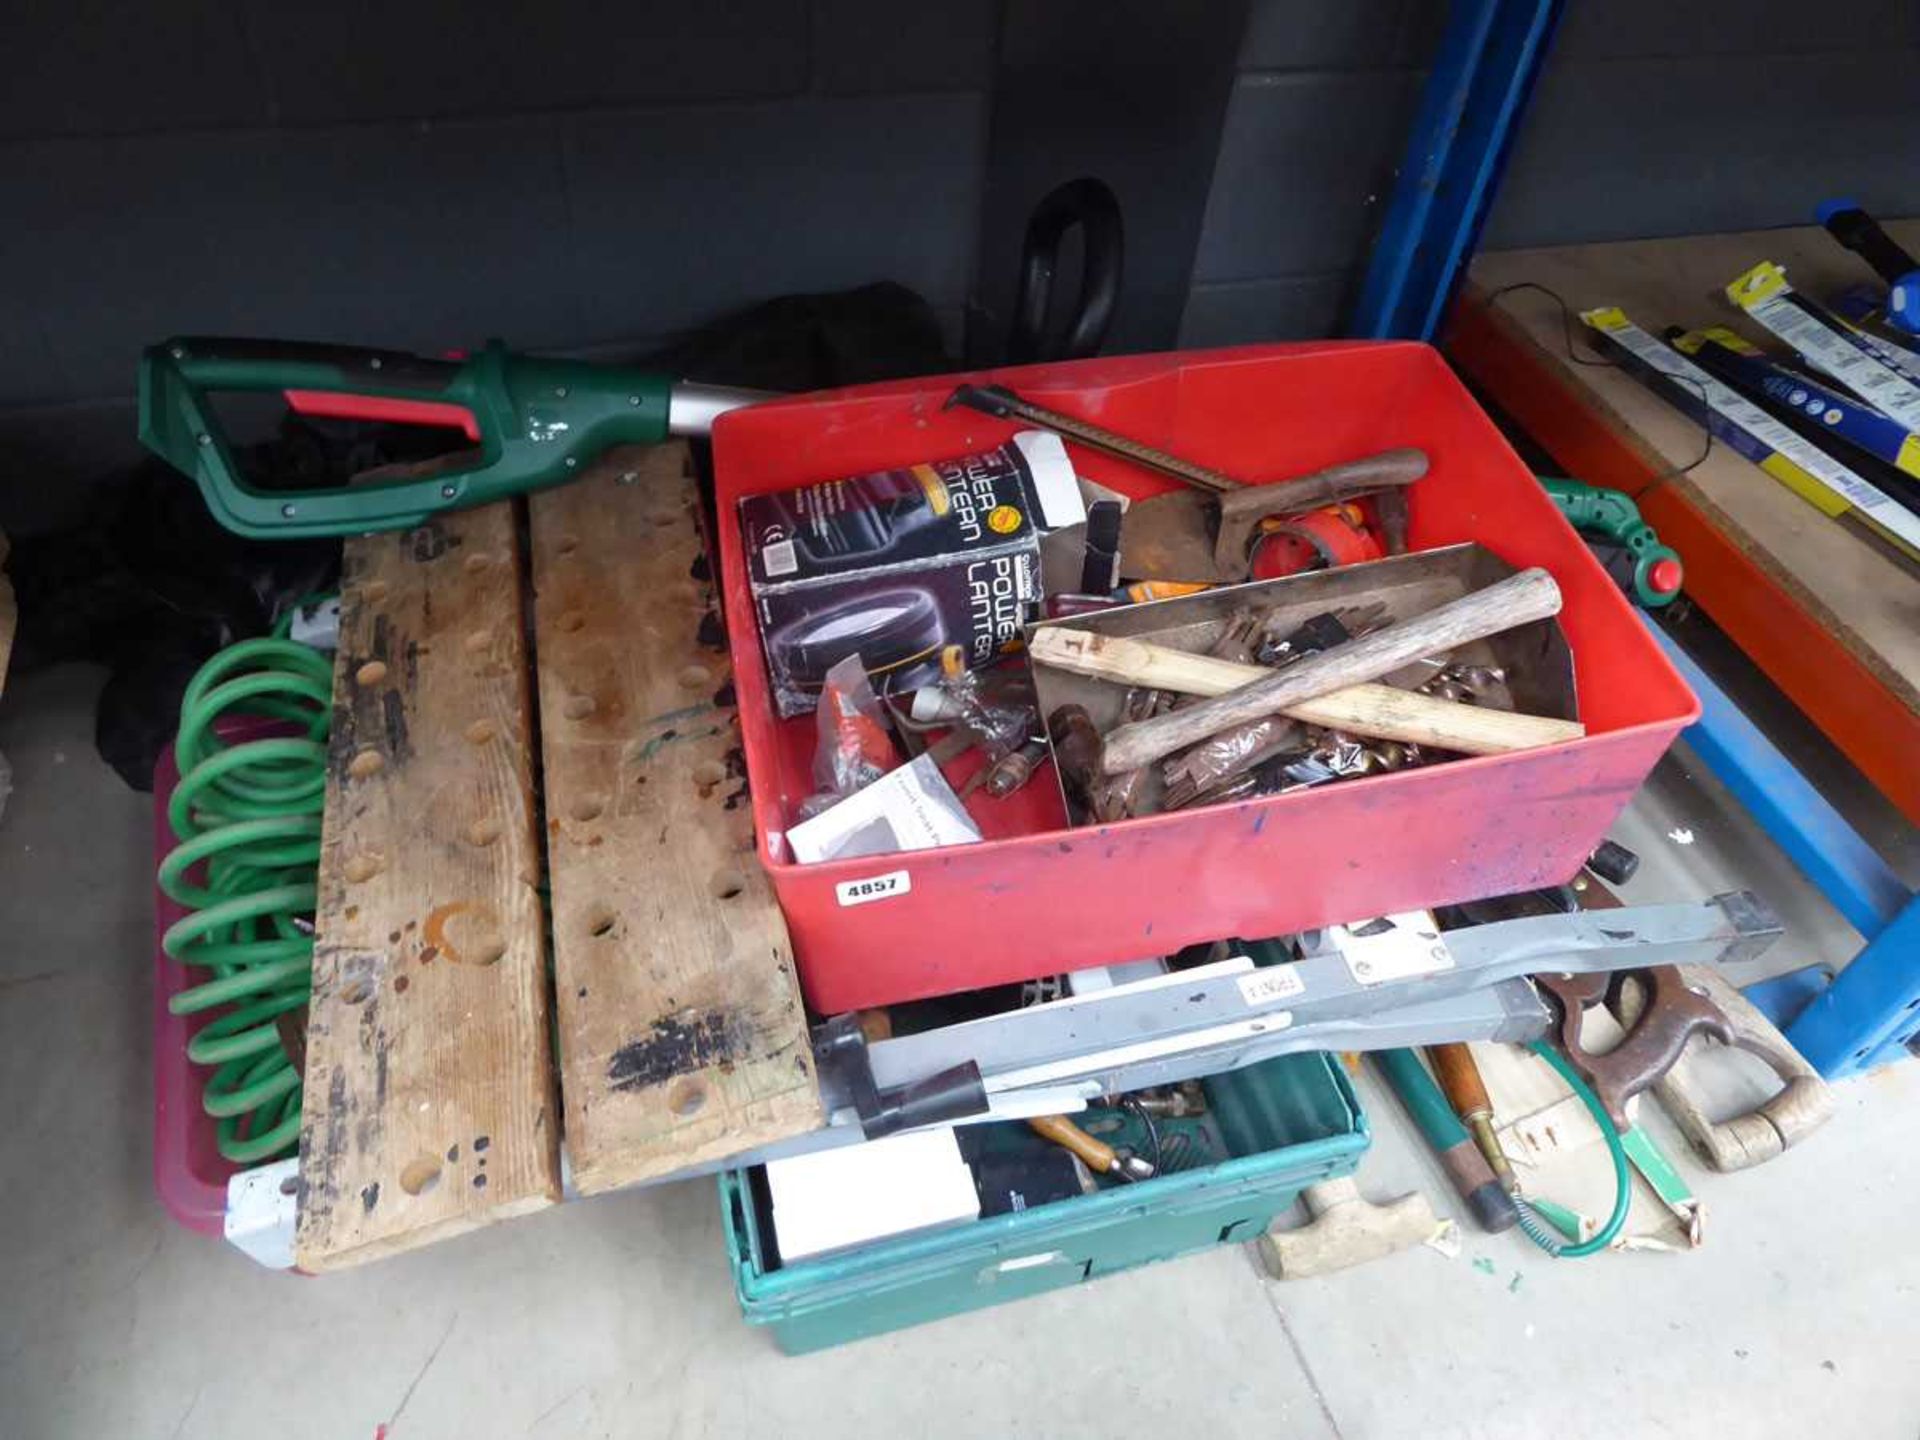 1/4 of an underbay containing tools, workbench, saws, strimmer etc.